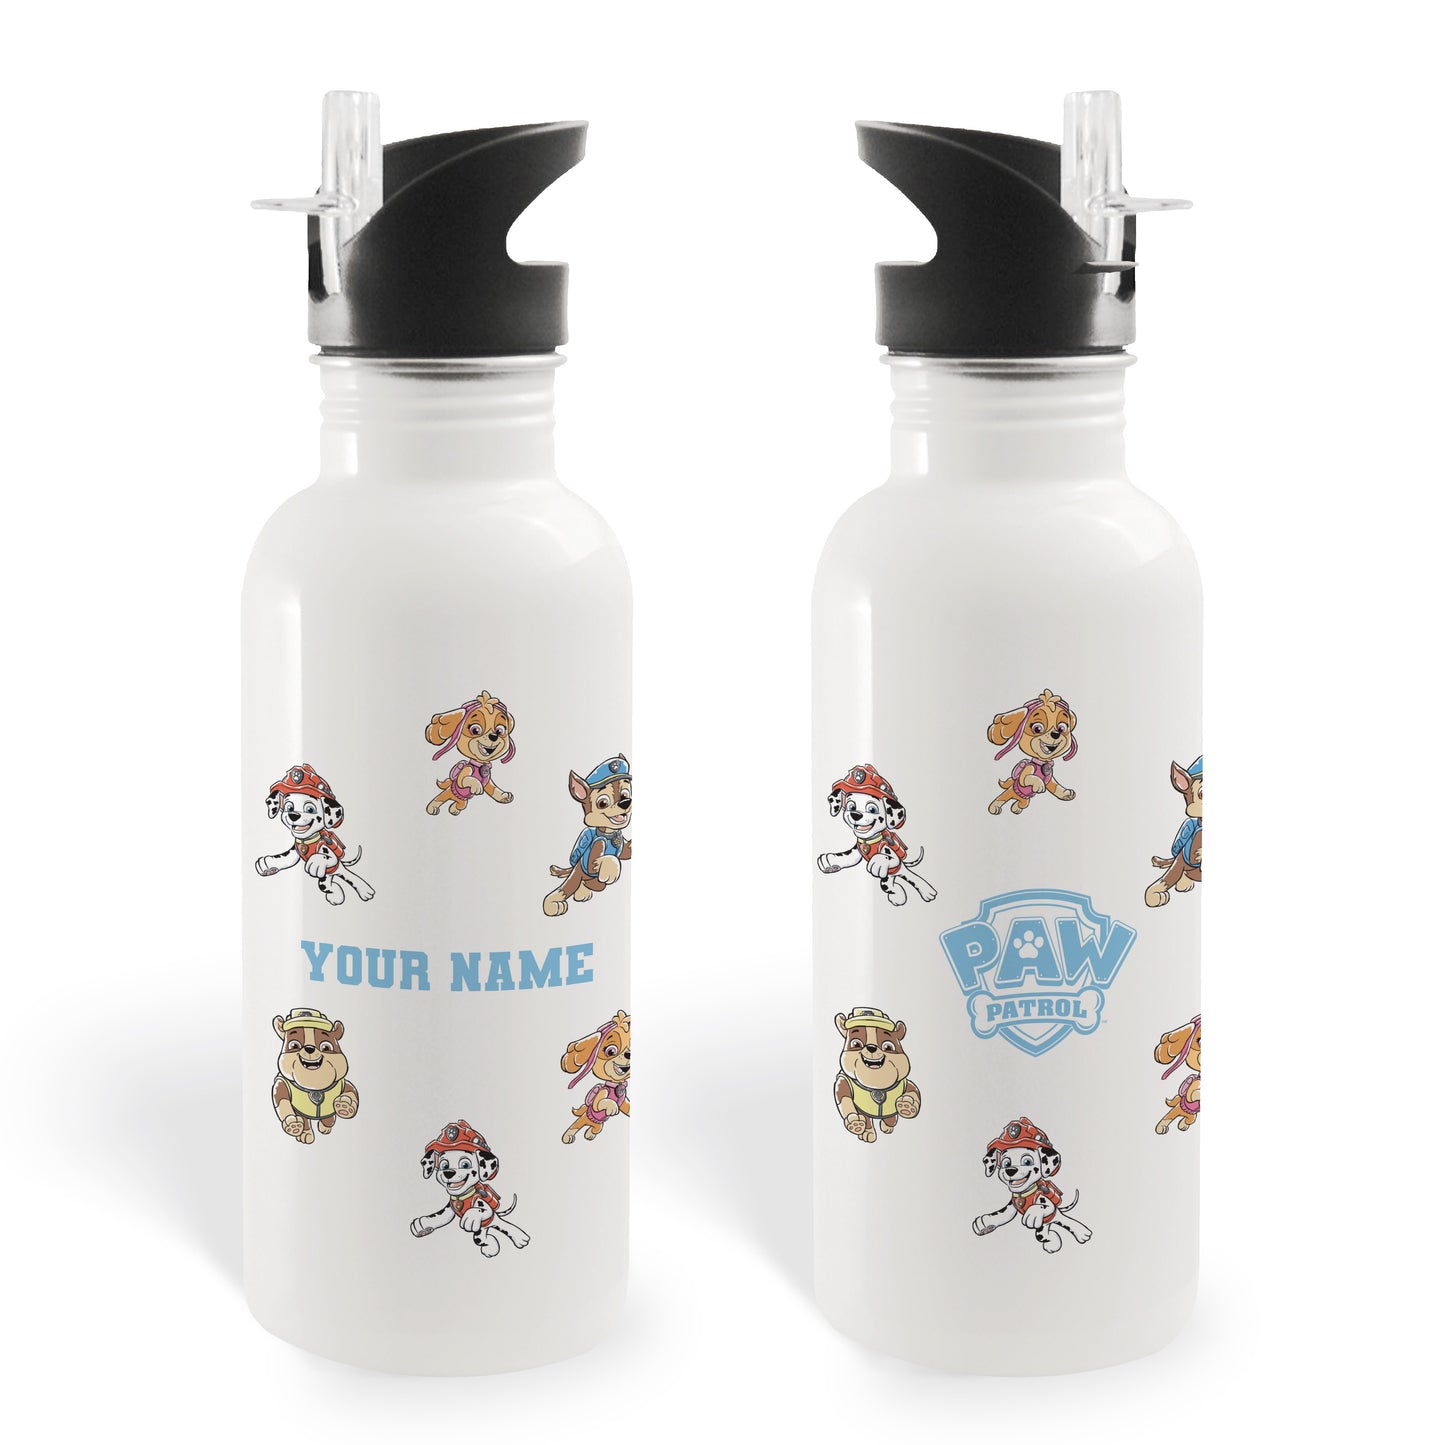 PAW Patrol Heroes Unleashed Personalized 20 oz Screw Top Water Bottle with Straw